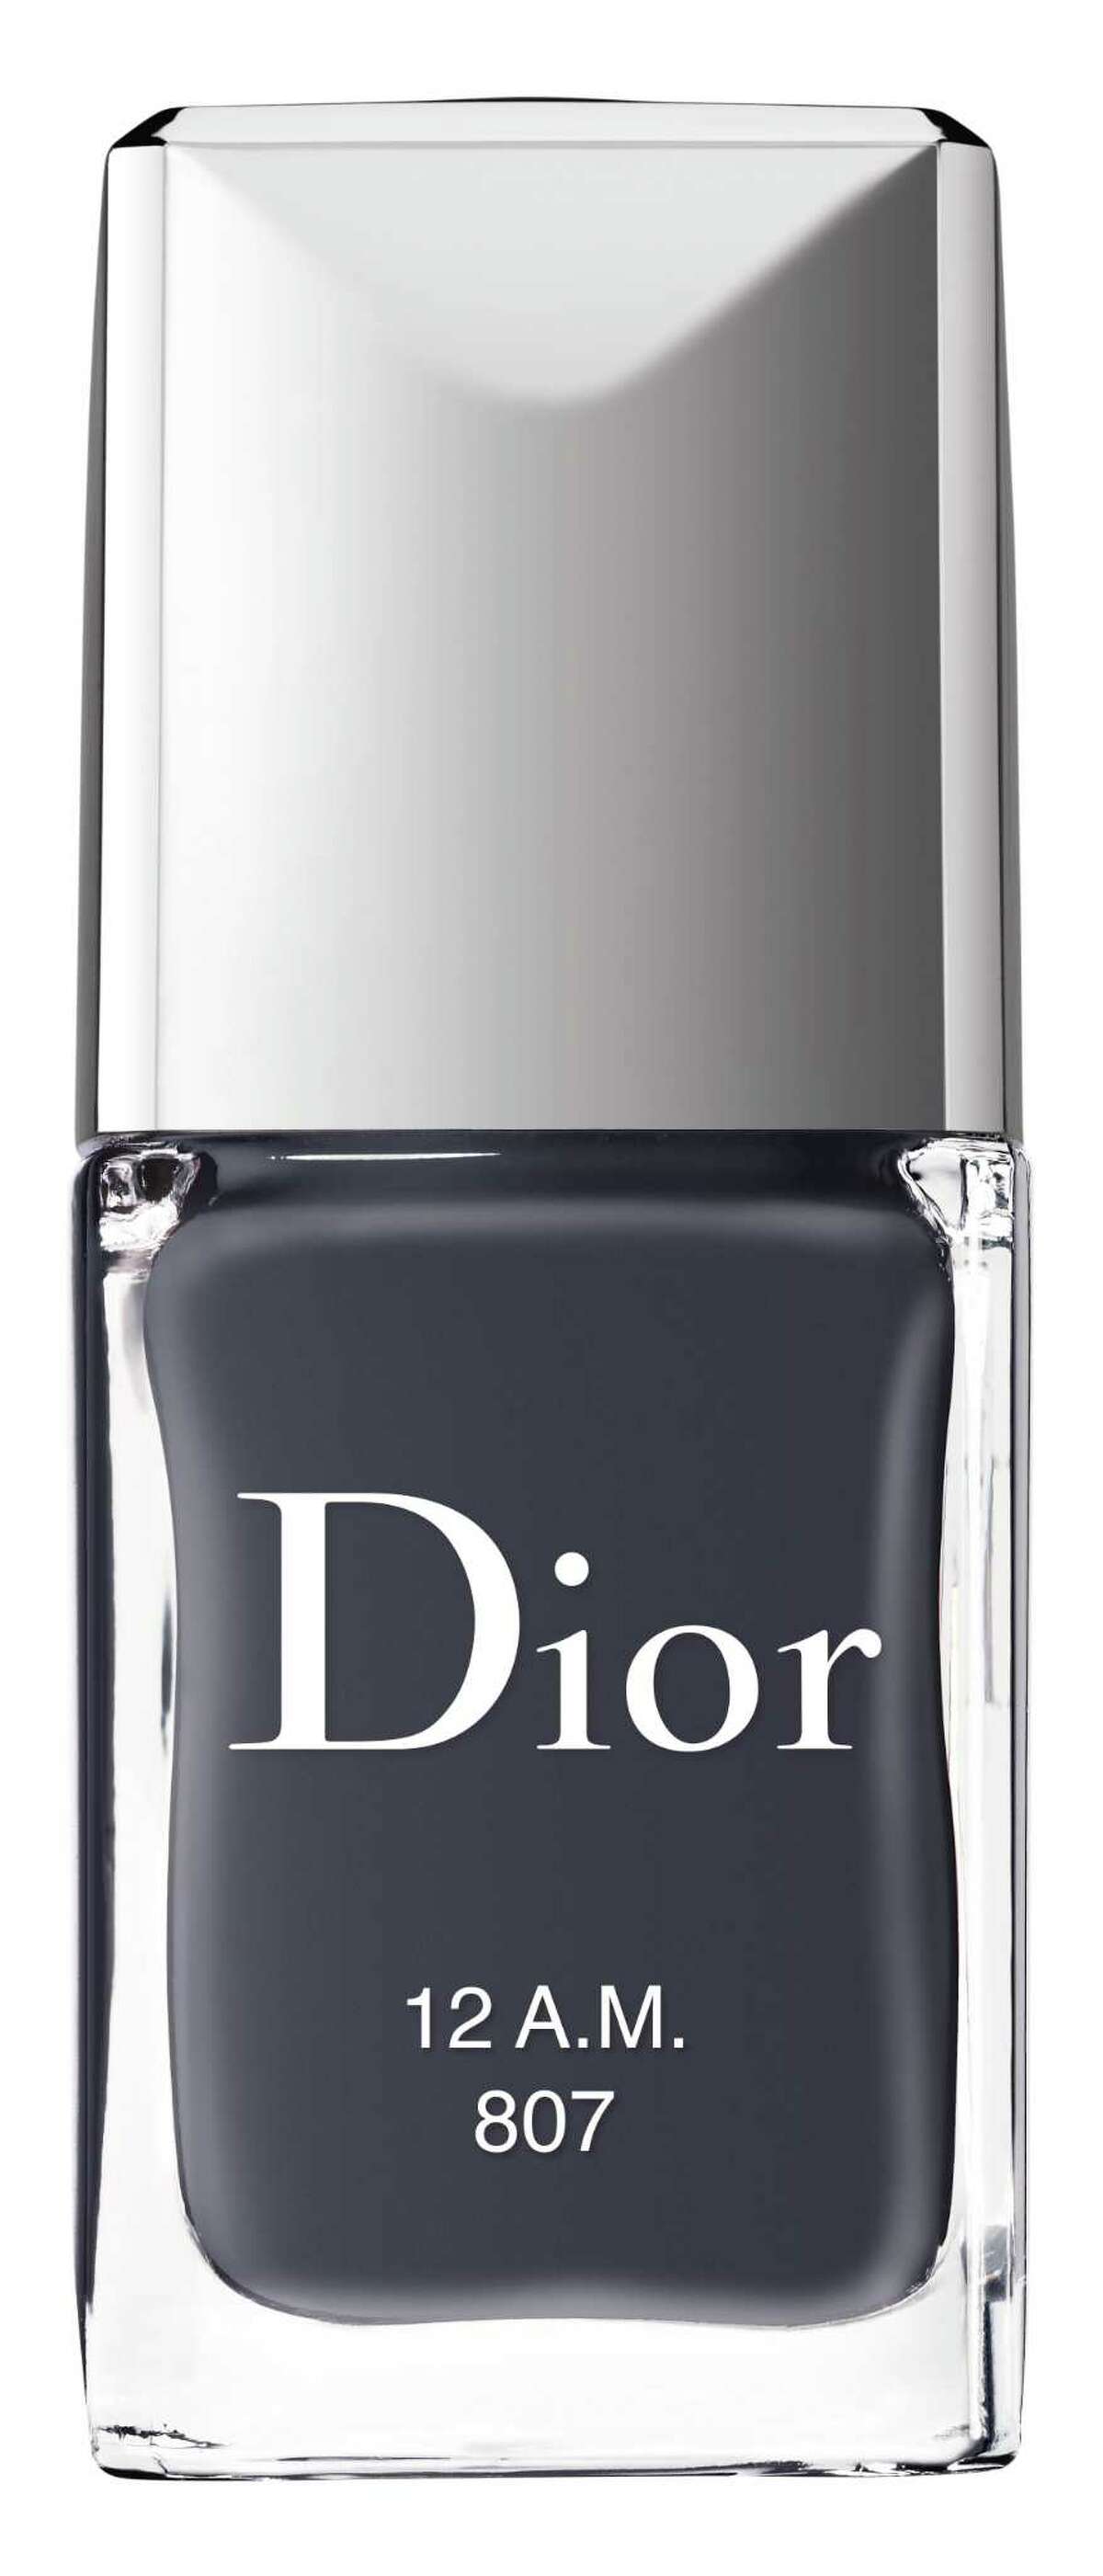 The season's hottest nail colors offer bold statements, dark definitions